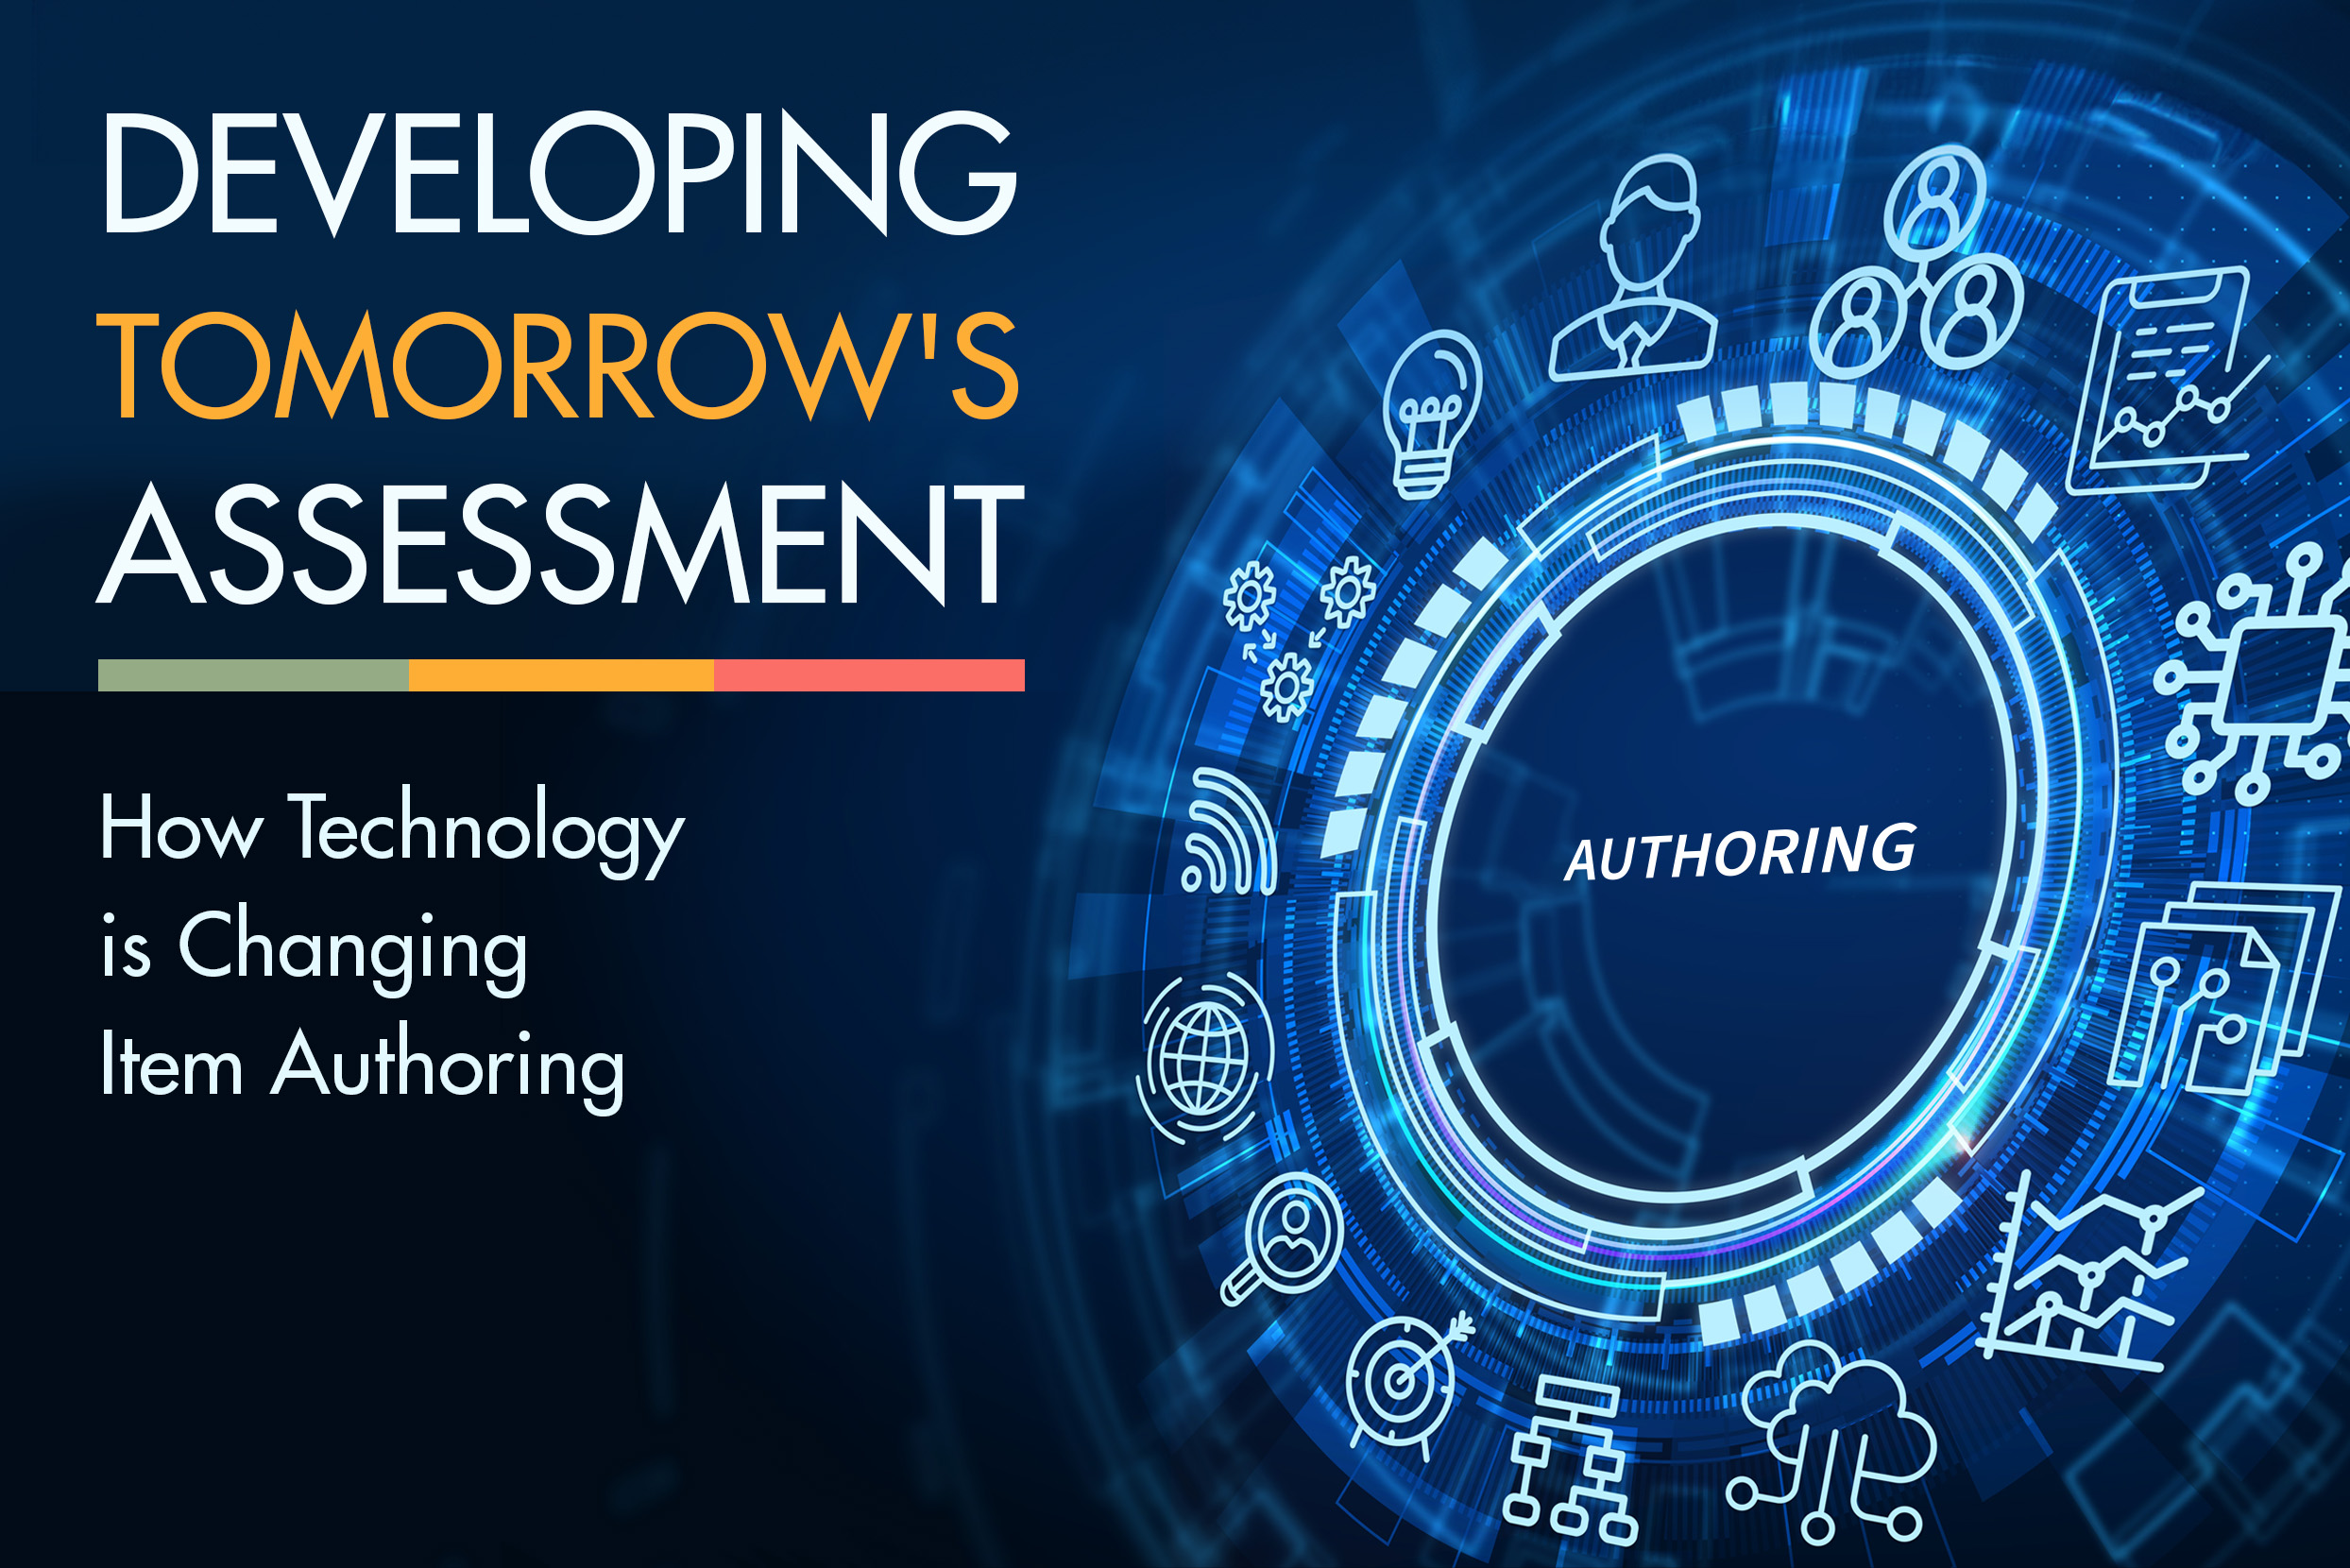 Developing Tomorrow's Assessment: How Technology is Changing Item Authoring